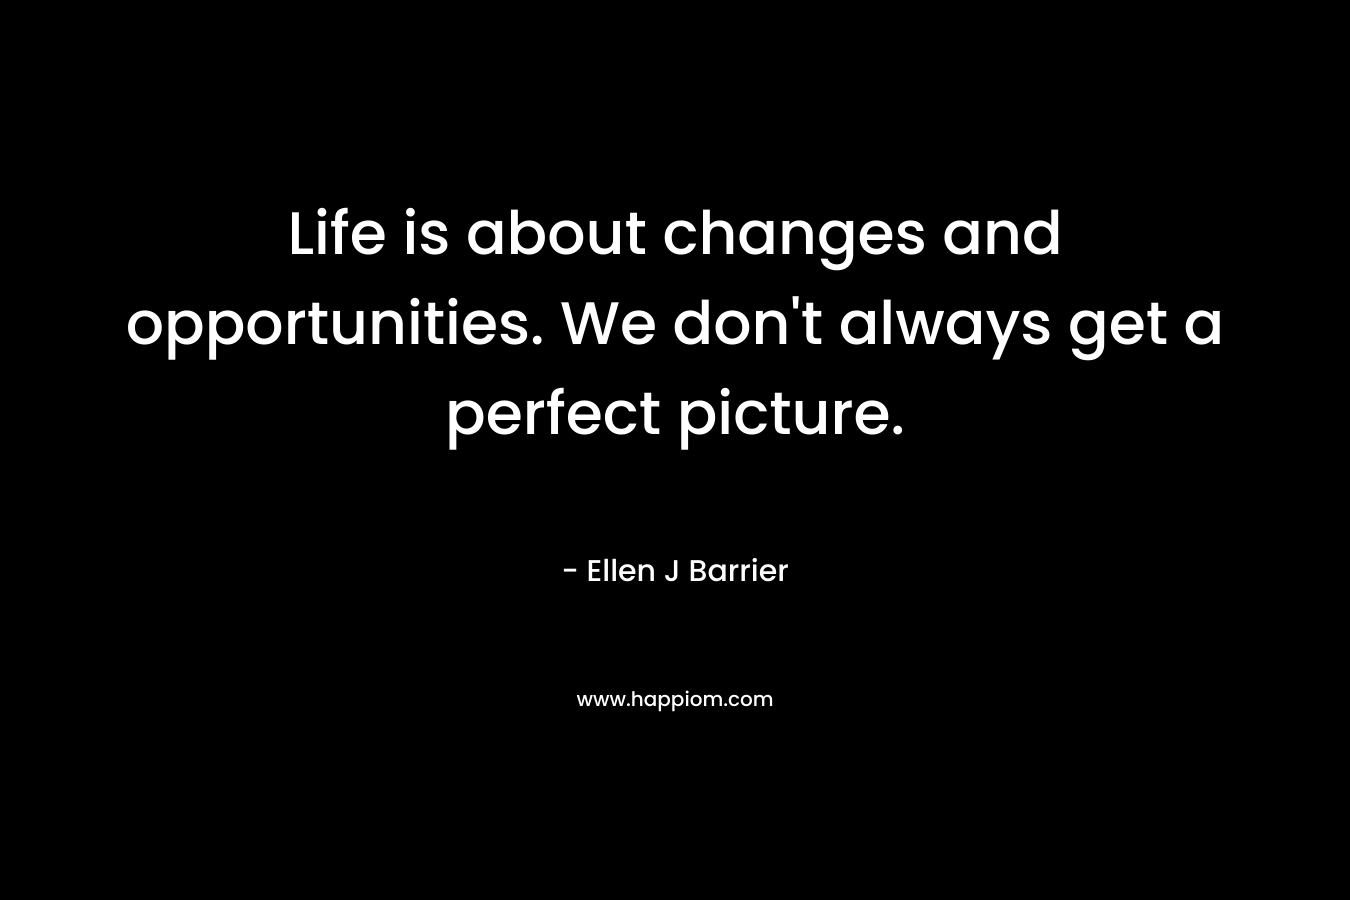 Life is about changes and opportunities. We don't always get a perfect picture.